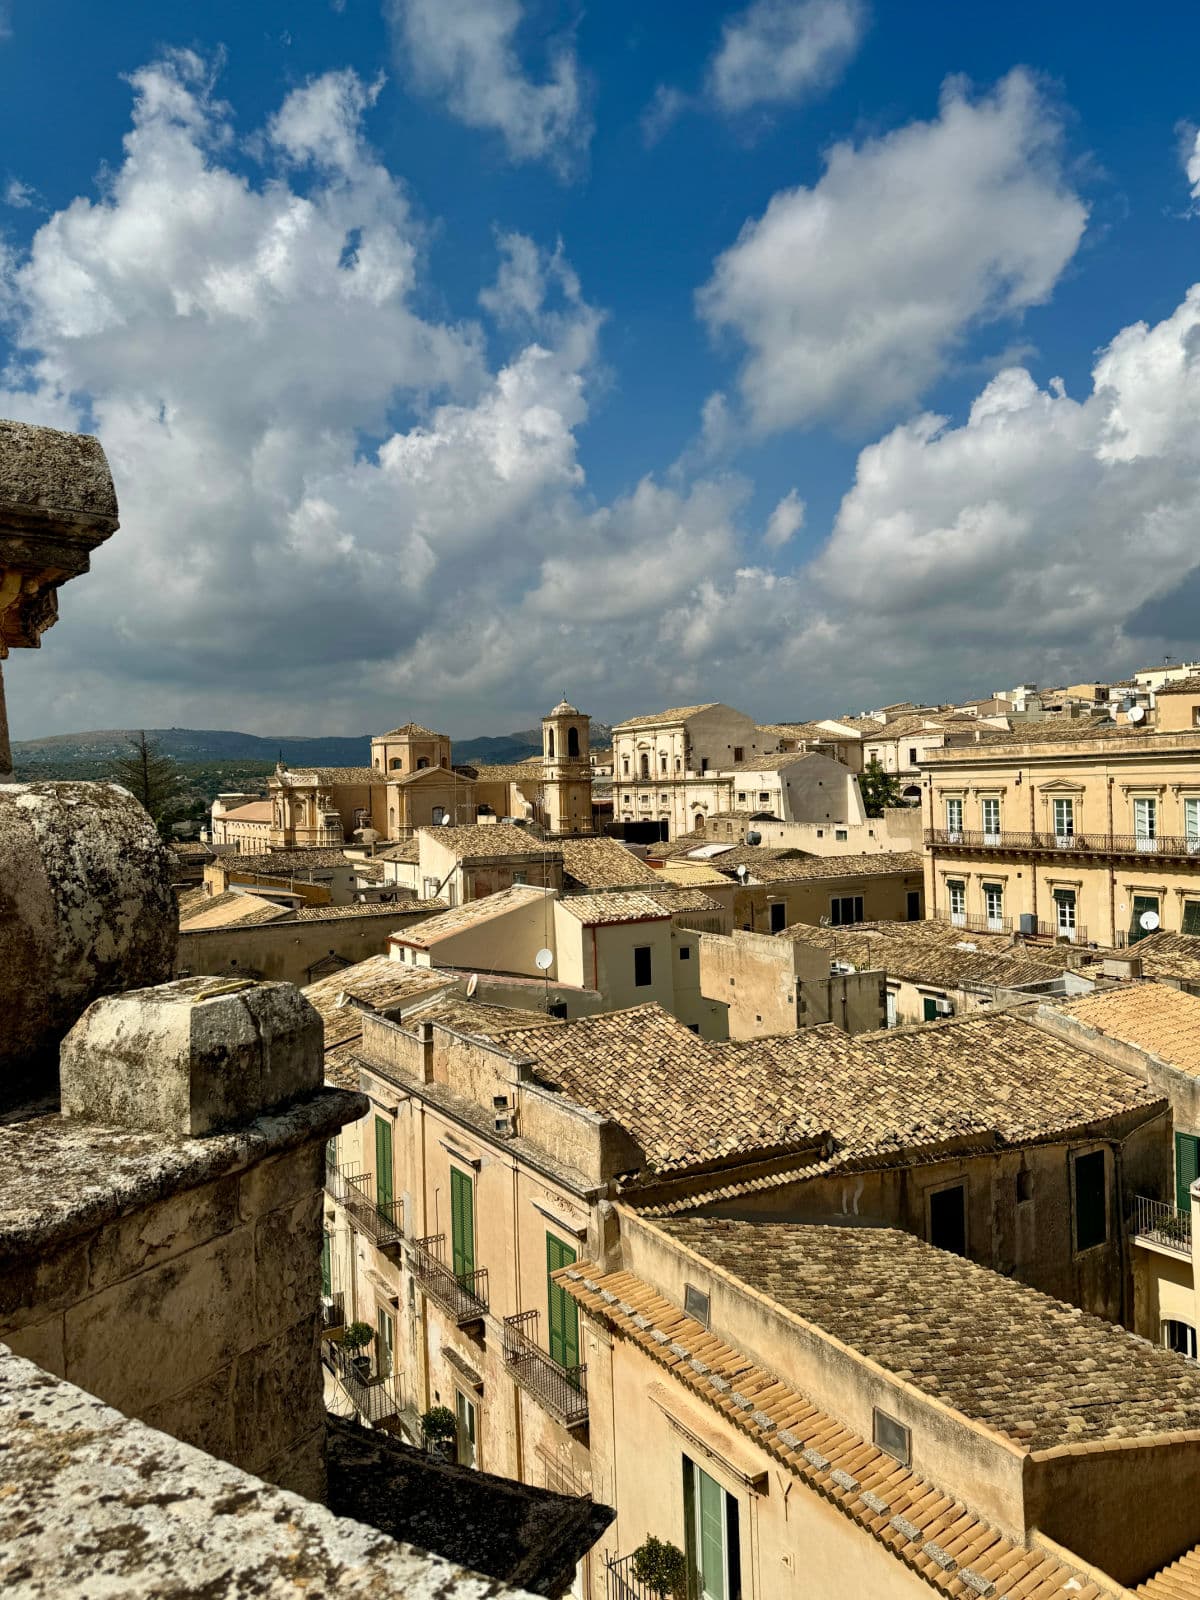 View of olf city in Sicily.